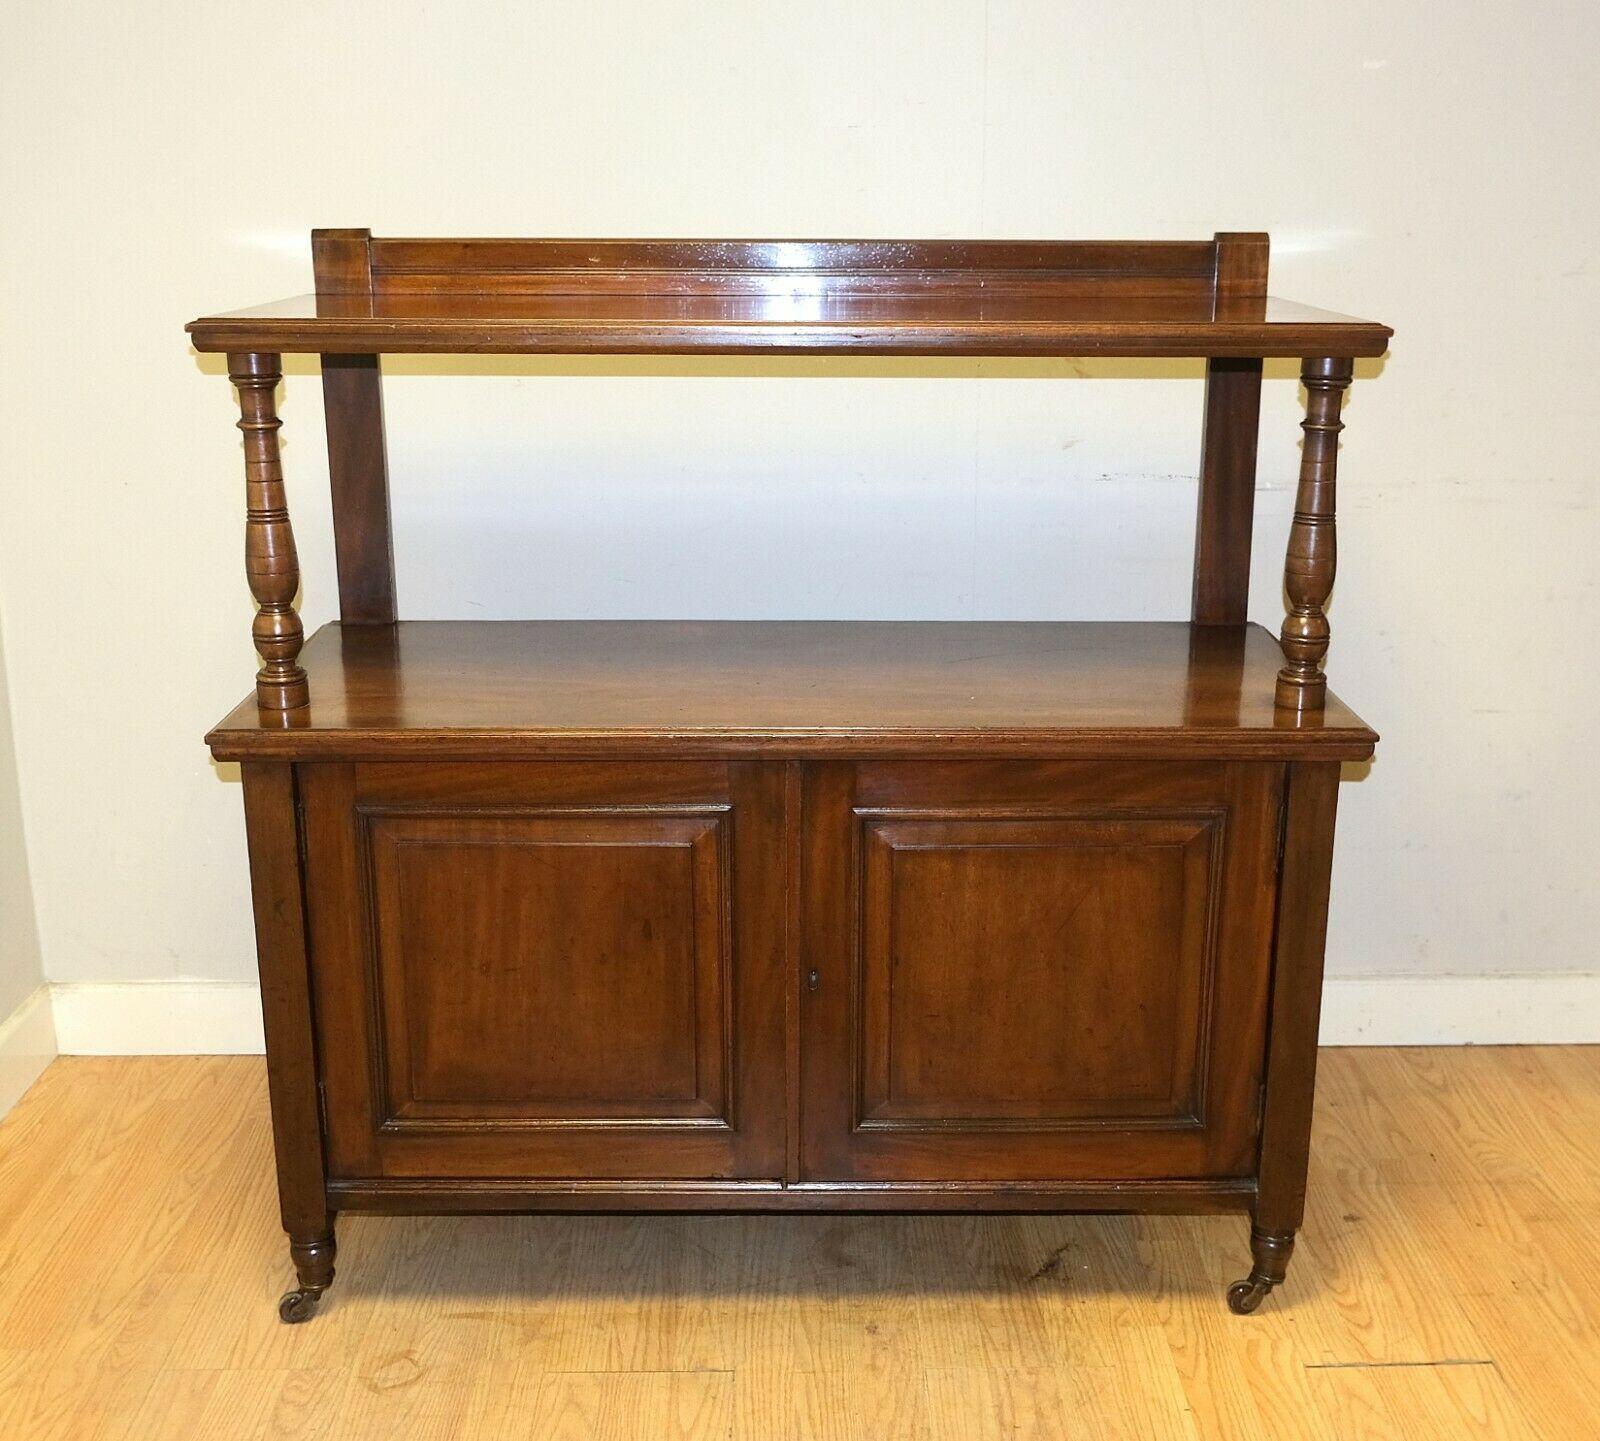 We are delighted to offer for sale this charming brown Mahogany Victorian Whatnot cupboard on castors.

This attractive and solid piece is well presented with an open upper tier and nice front supports and gallery edge top. The lower part opens to